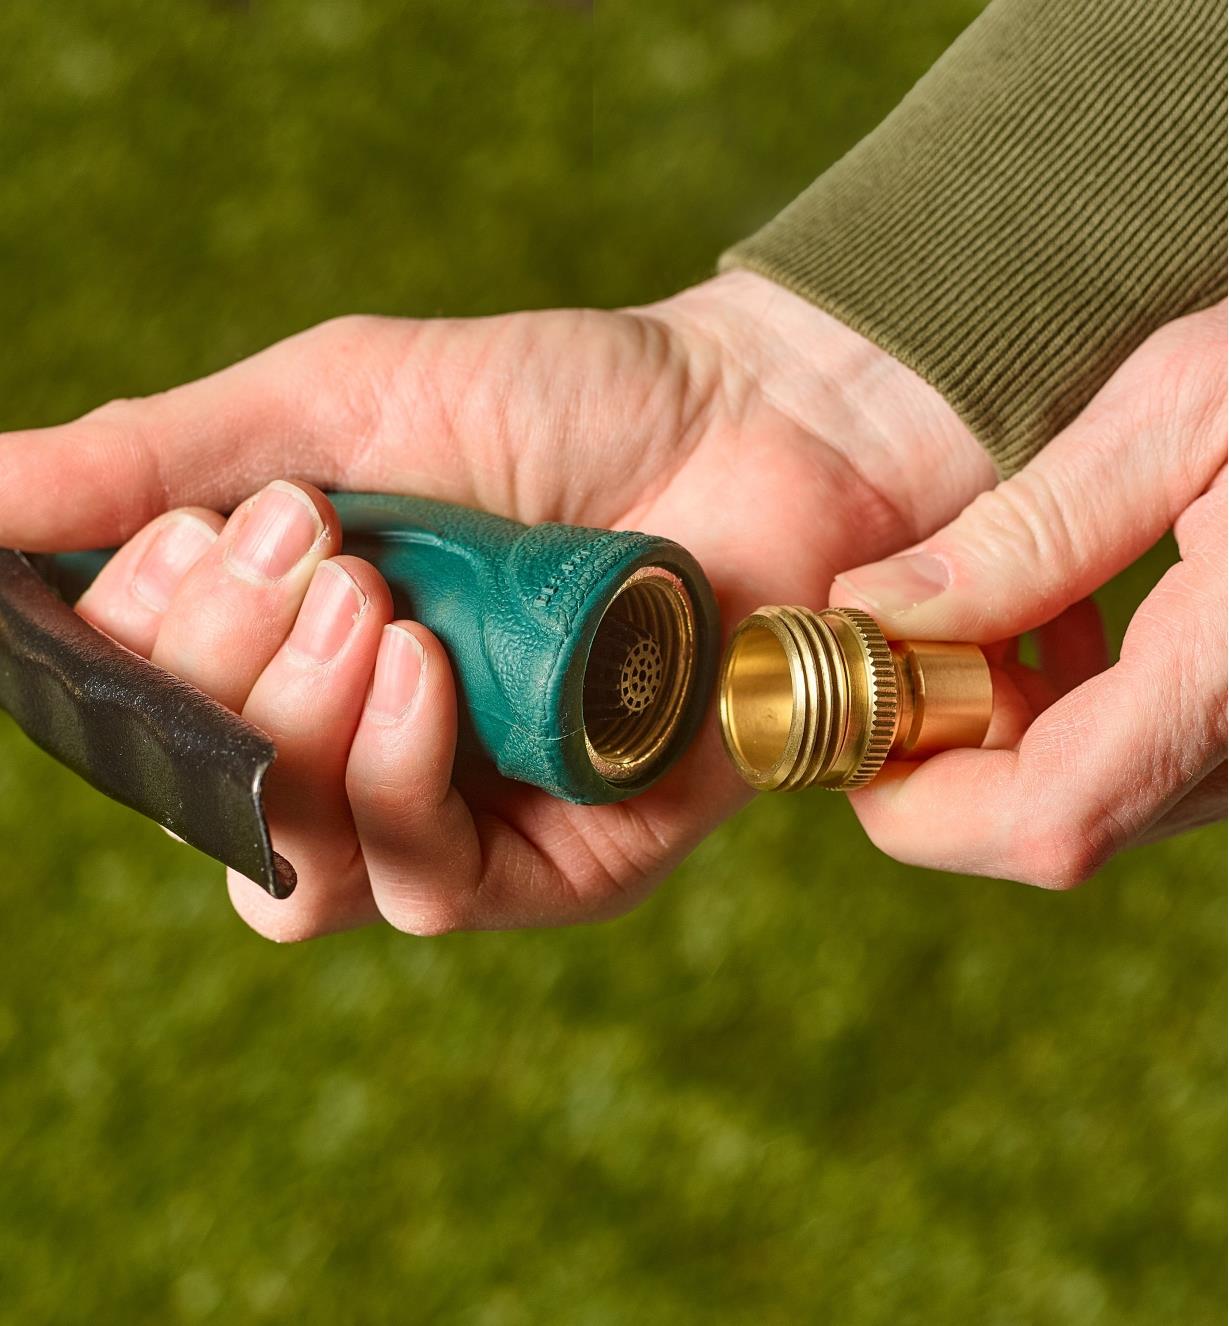 A hose nozzle is held in one hand with a male tool adapter held in the other hand